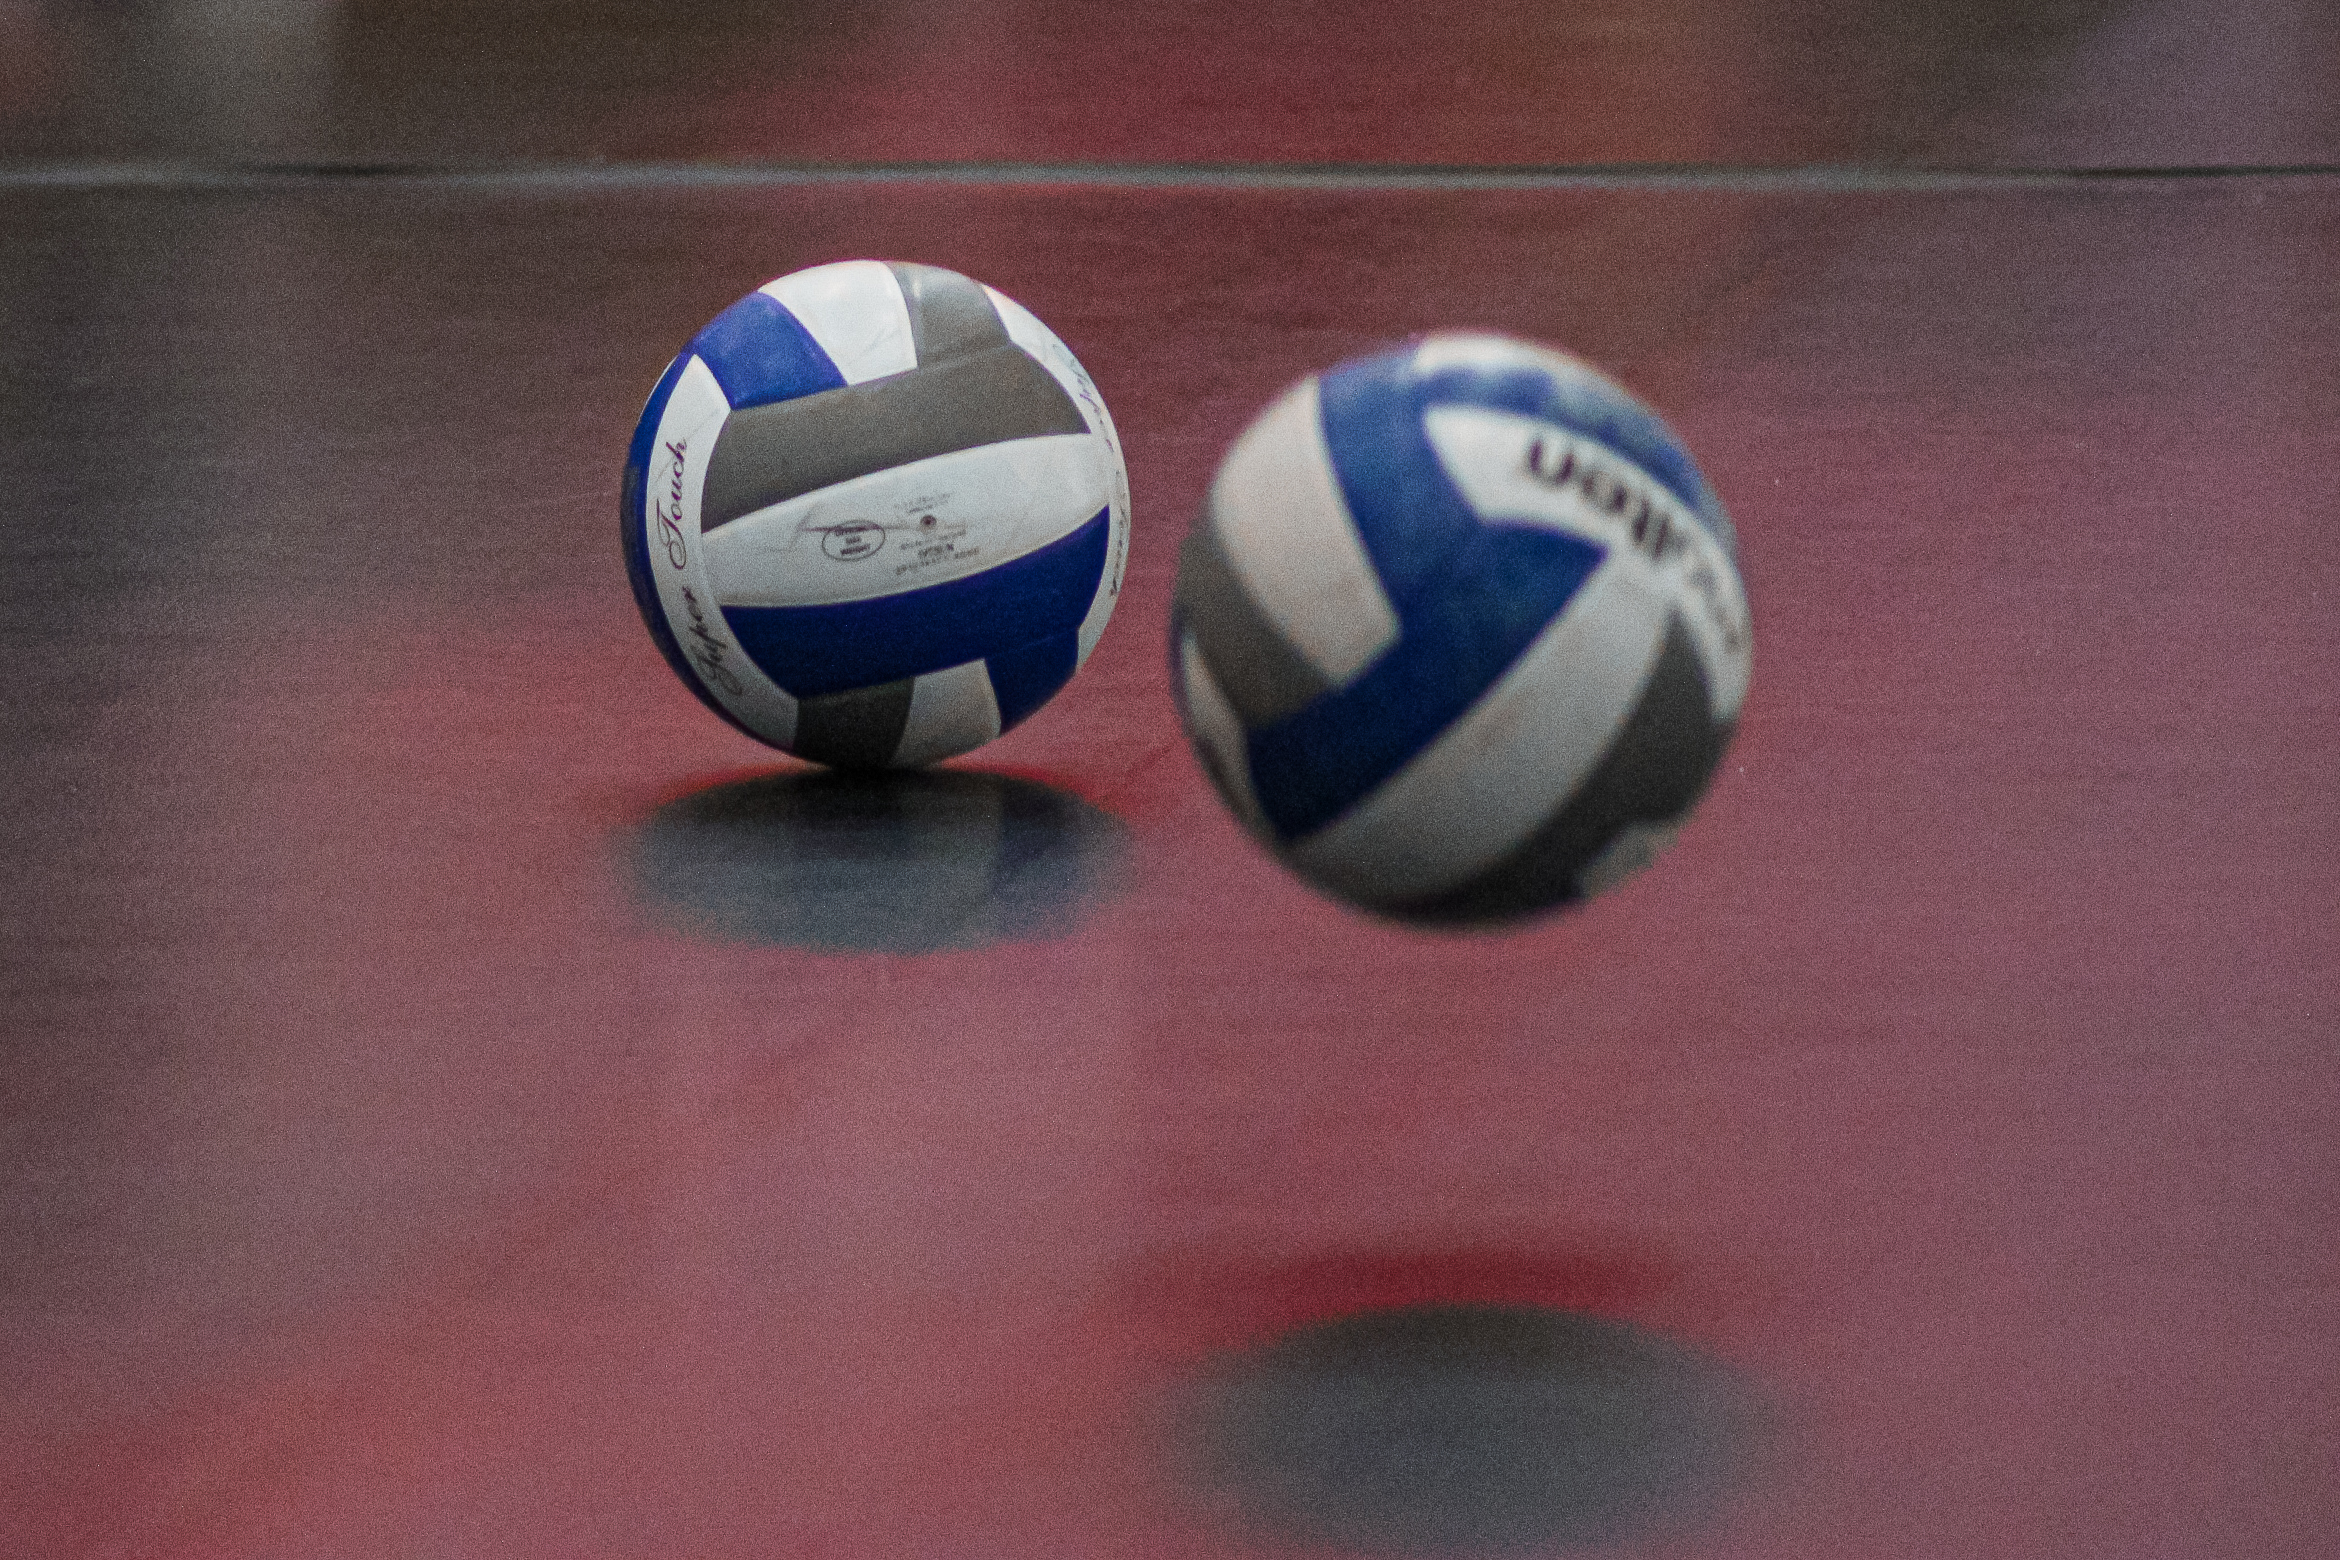 Volleyballs bouncing on the court.